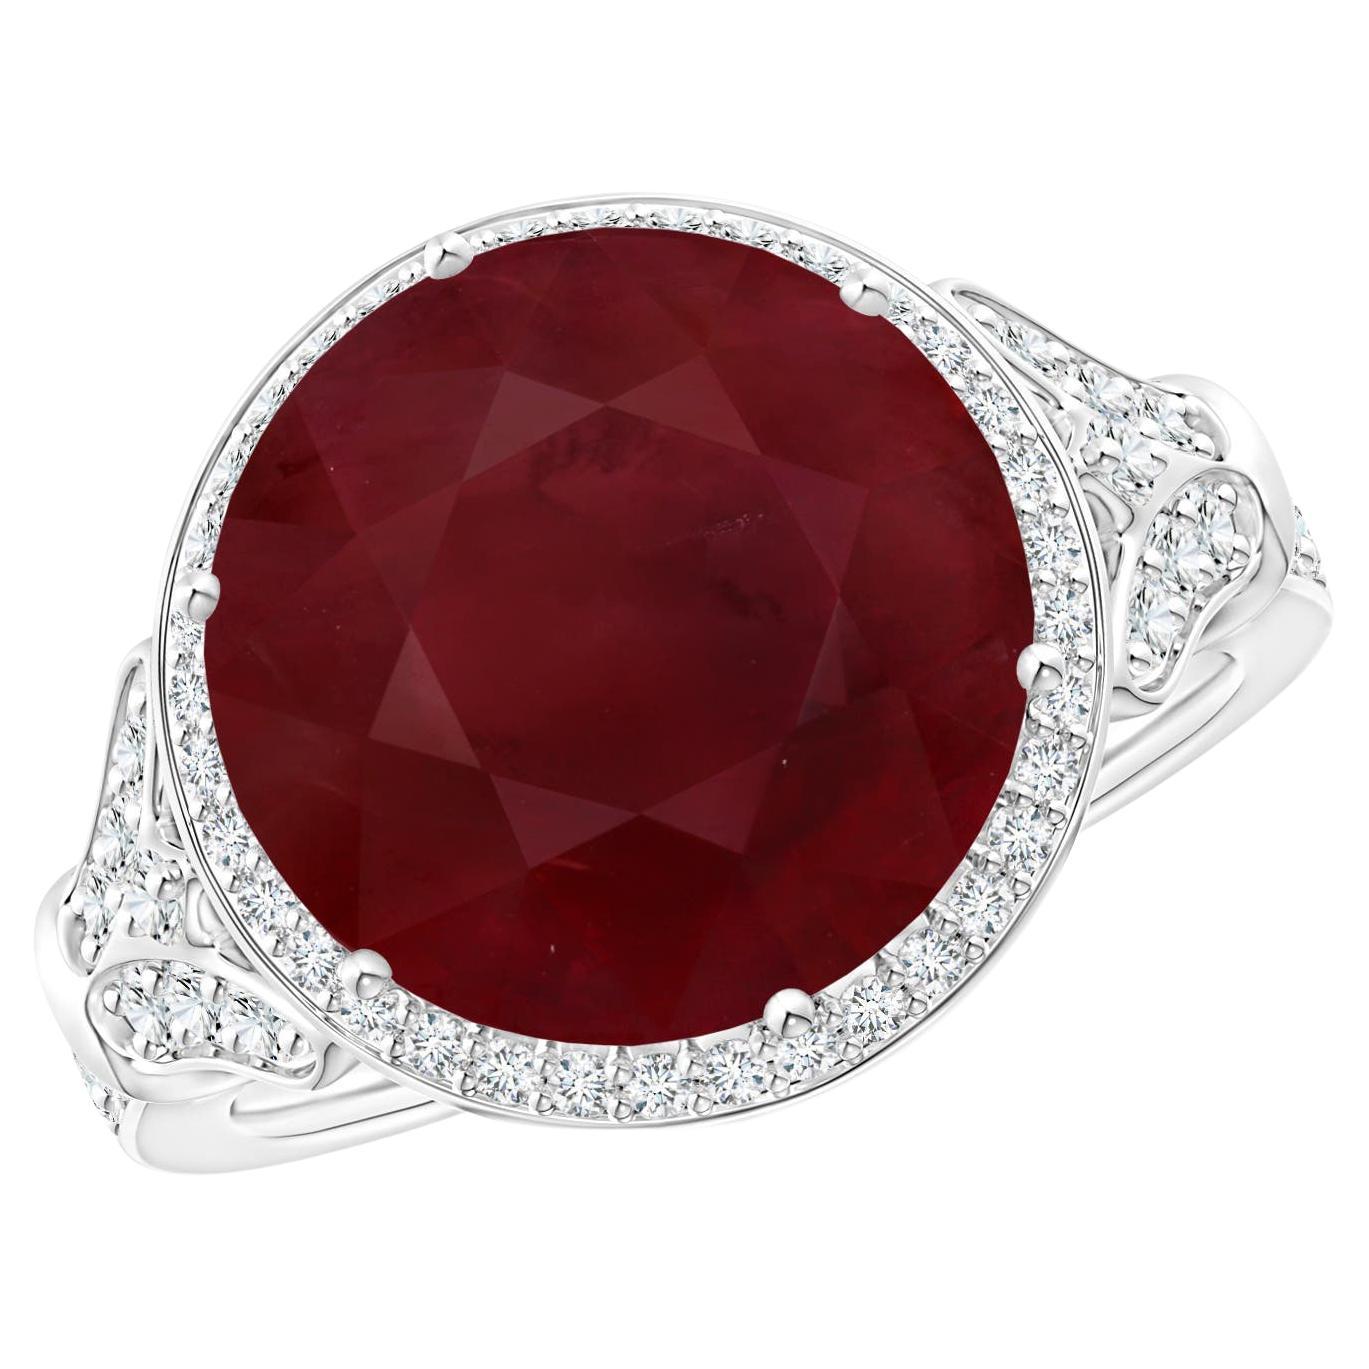 For Sale:  GIA Certified Natural Ruby Vintage Style Cocktail Ring in White Gold